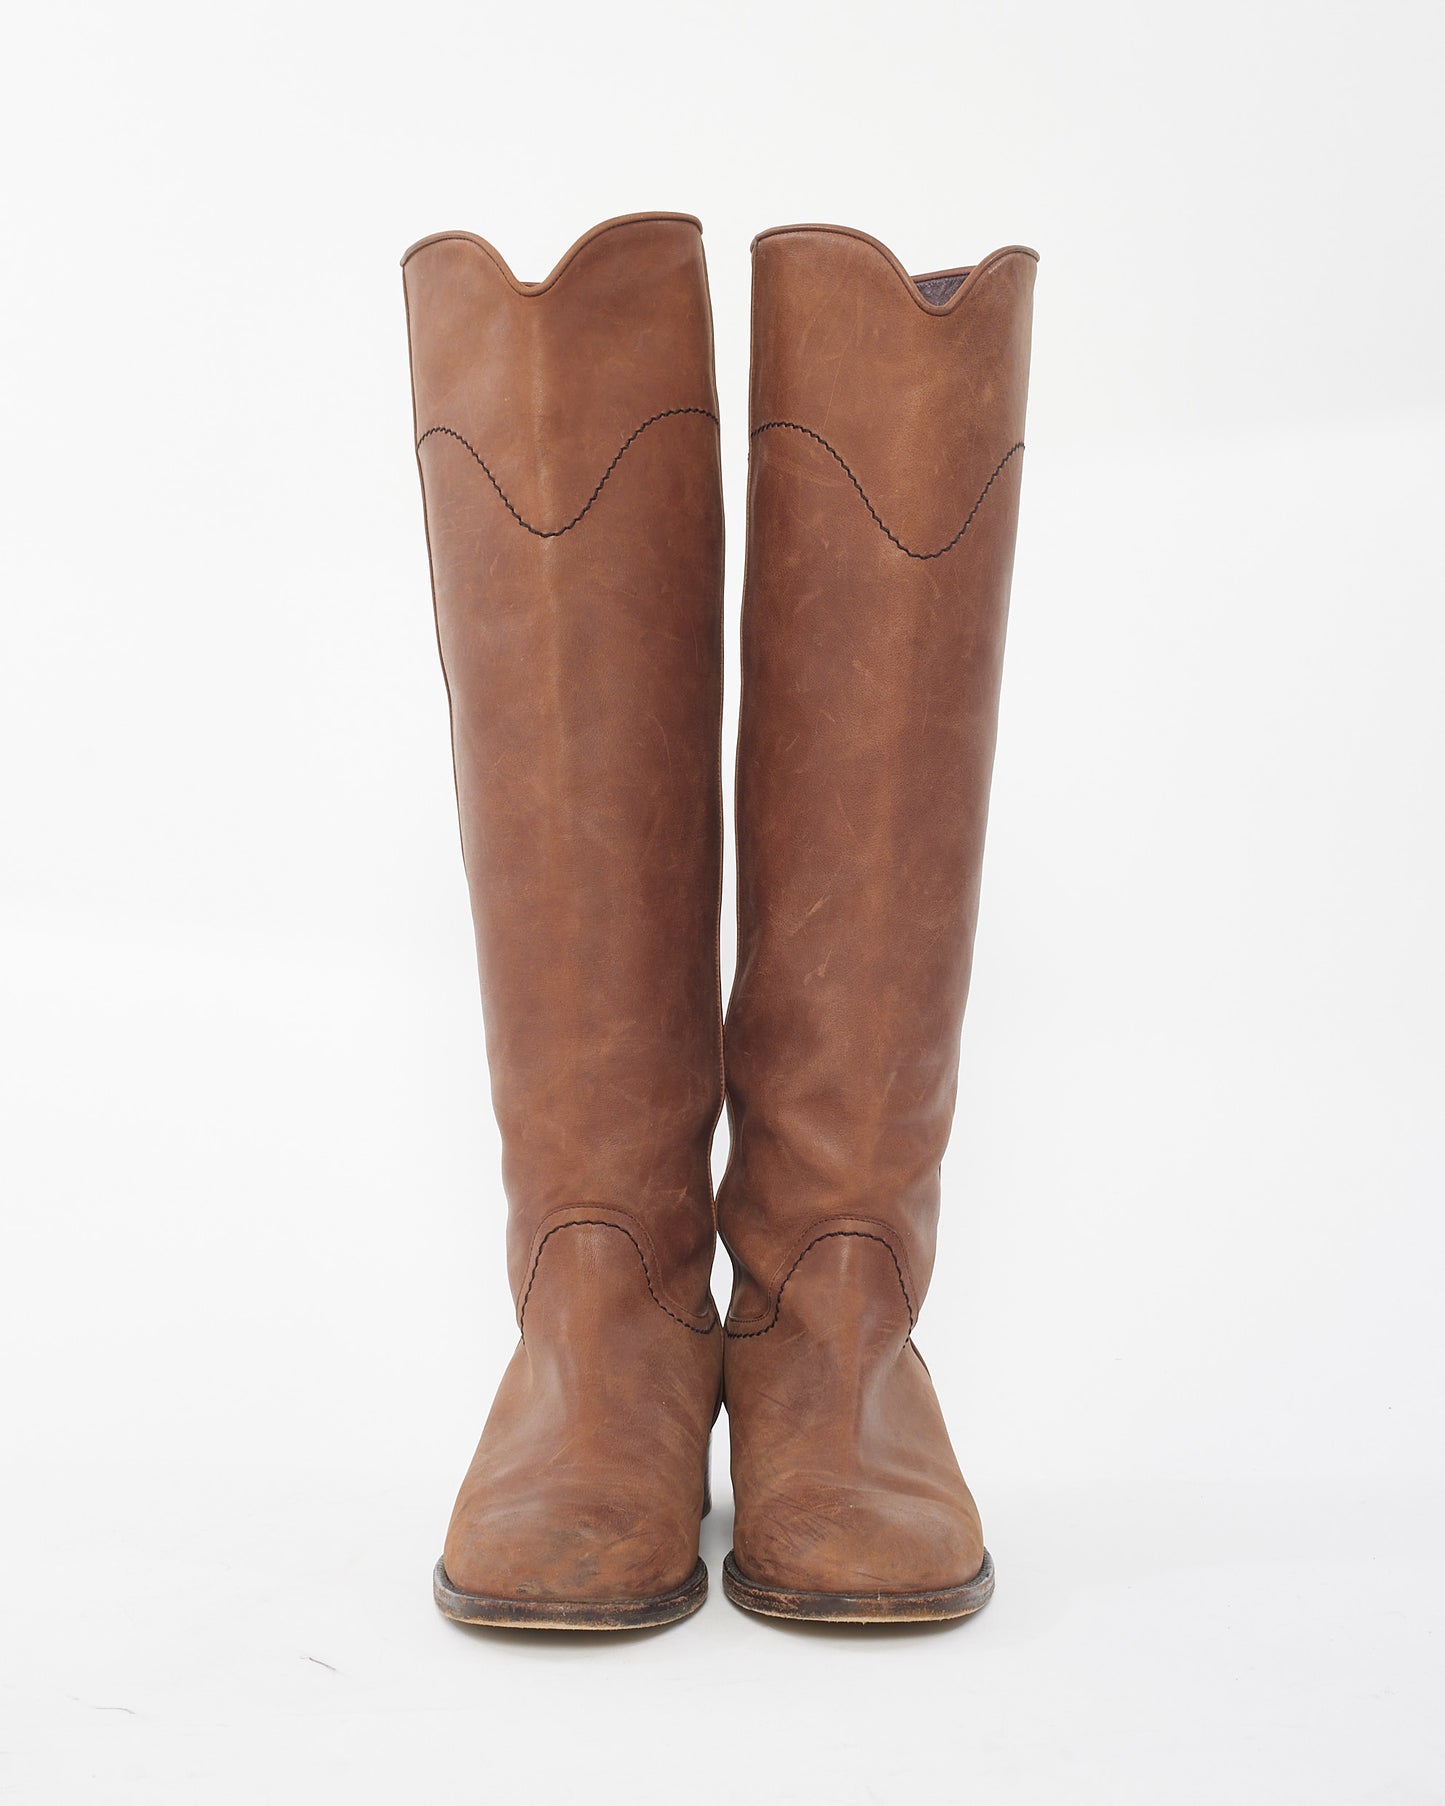 Chanel Camel Leather Knee High Logo Boots - 37